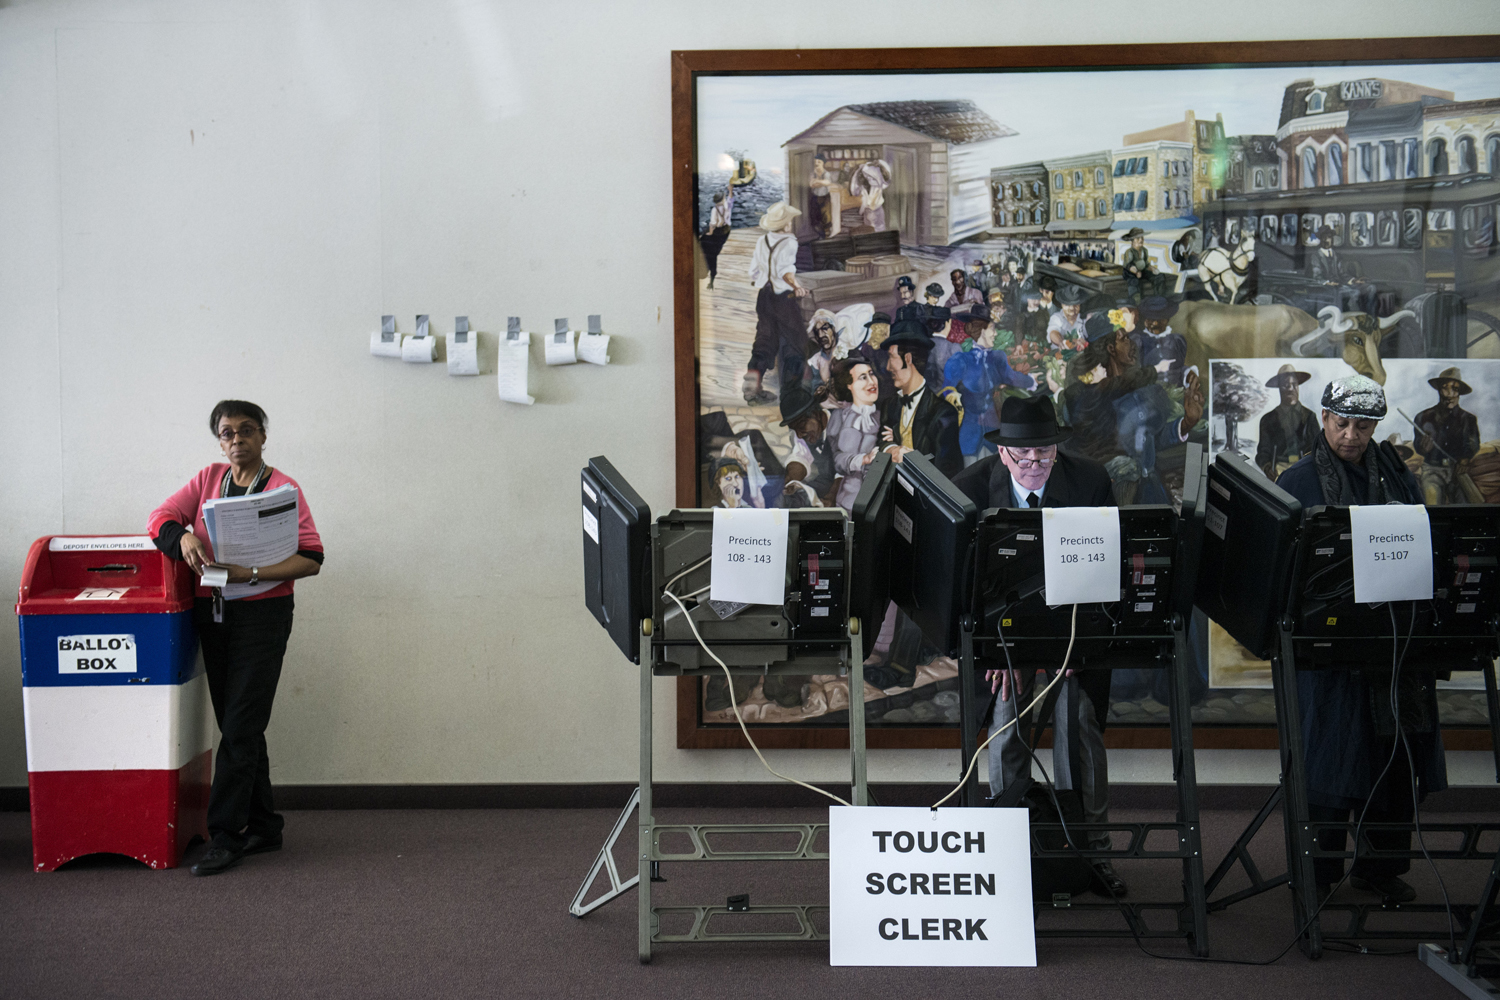 Image: Oct. 22, 2012. DC Board of Elections worker Linda Johnson waits as voters cast their ballots on electronic voting machines during the first day of early voting in Washington, DC.